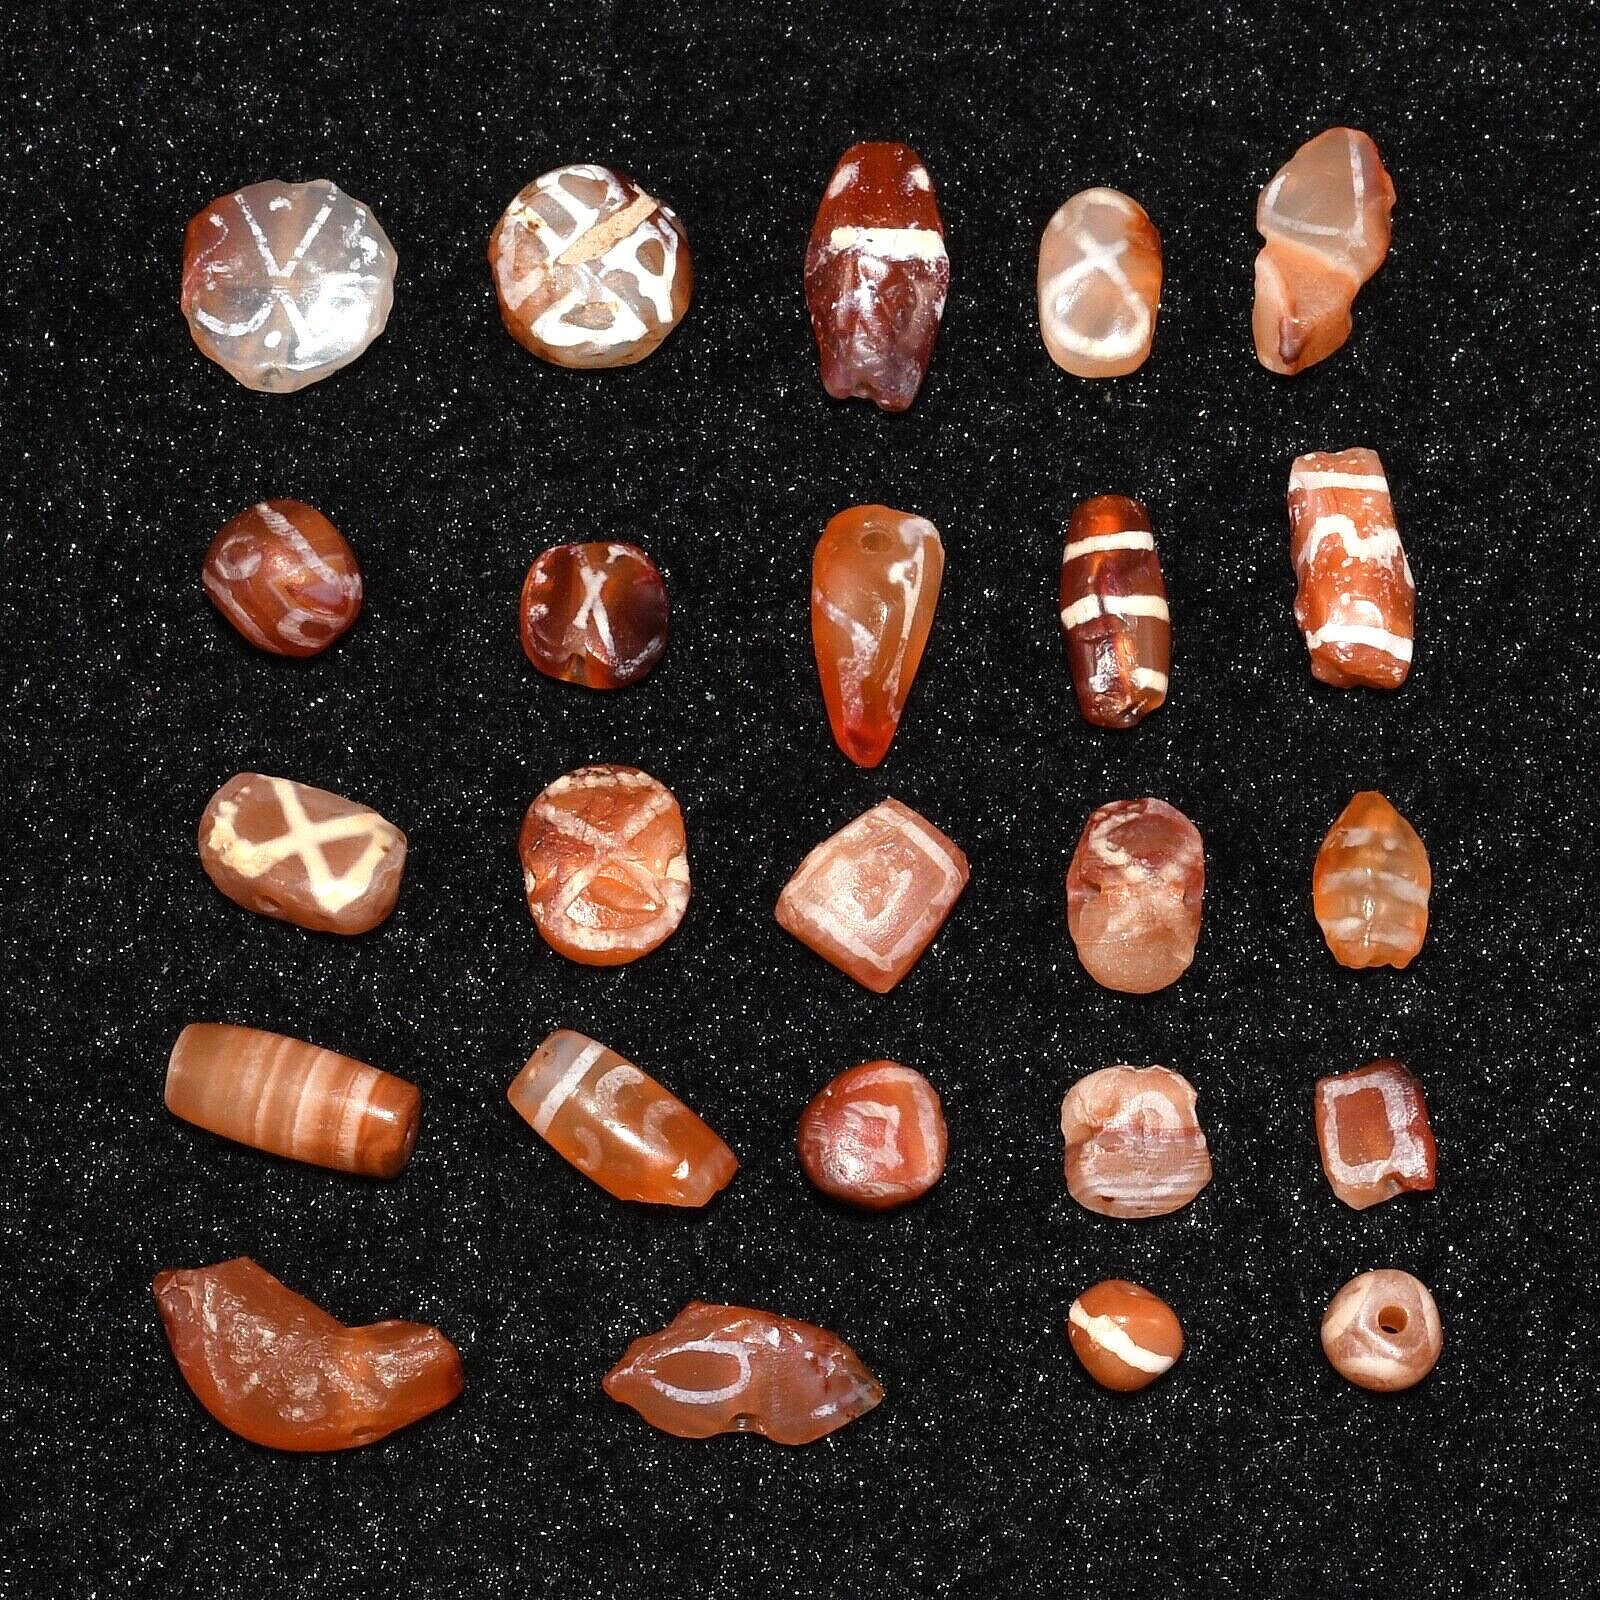 24 Genuine Ancient Pyu & Sassanian  Etched Carnelian Beads over 2000 Years Old